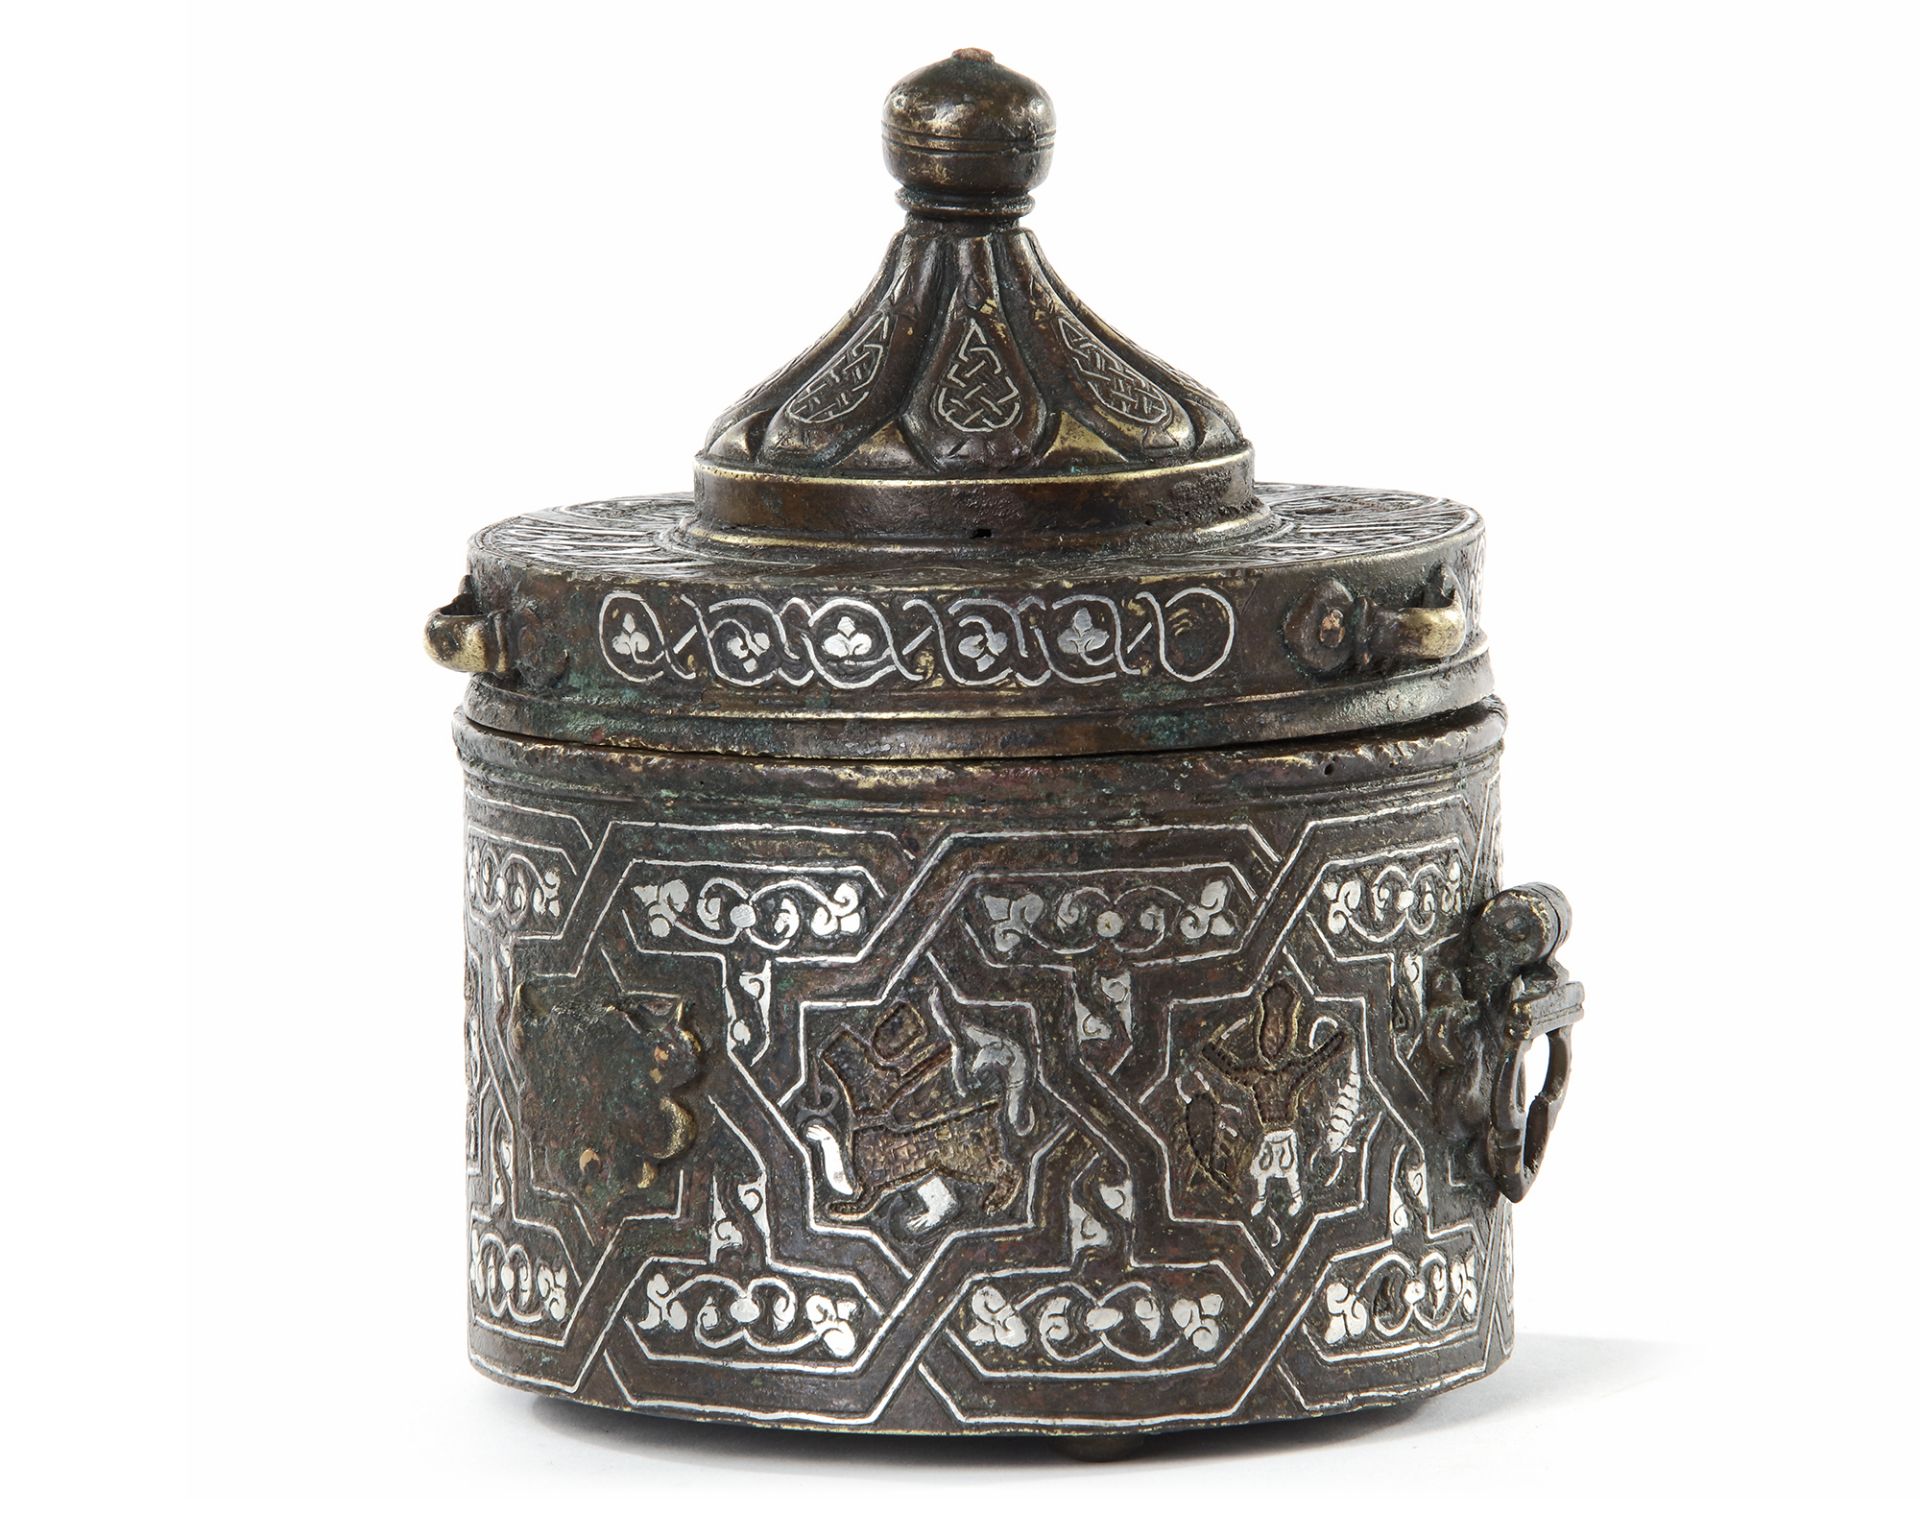 A FINE BRONZE INKWELL WITH A DOMED LID, KHORASAN, PERSIA, EARLY 13TH CENTURY - Image 2 of 4